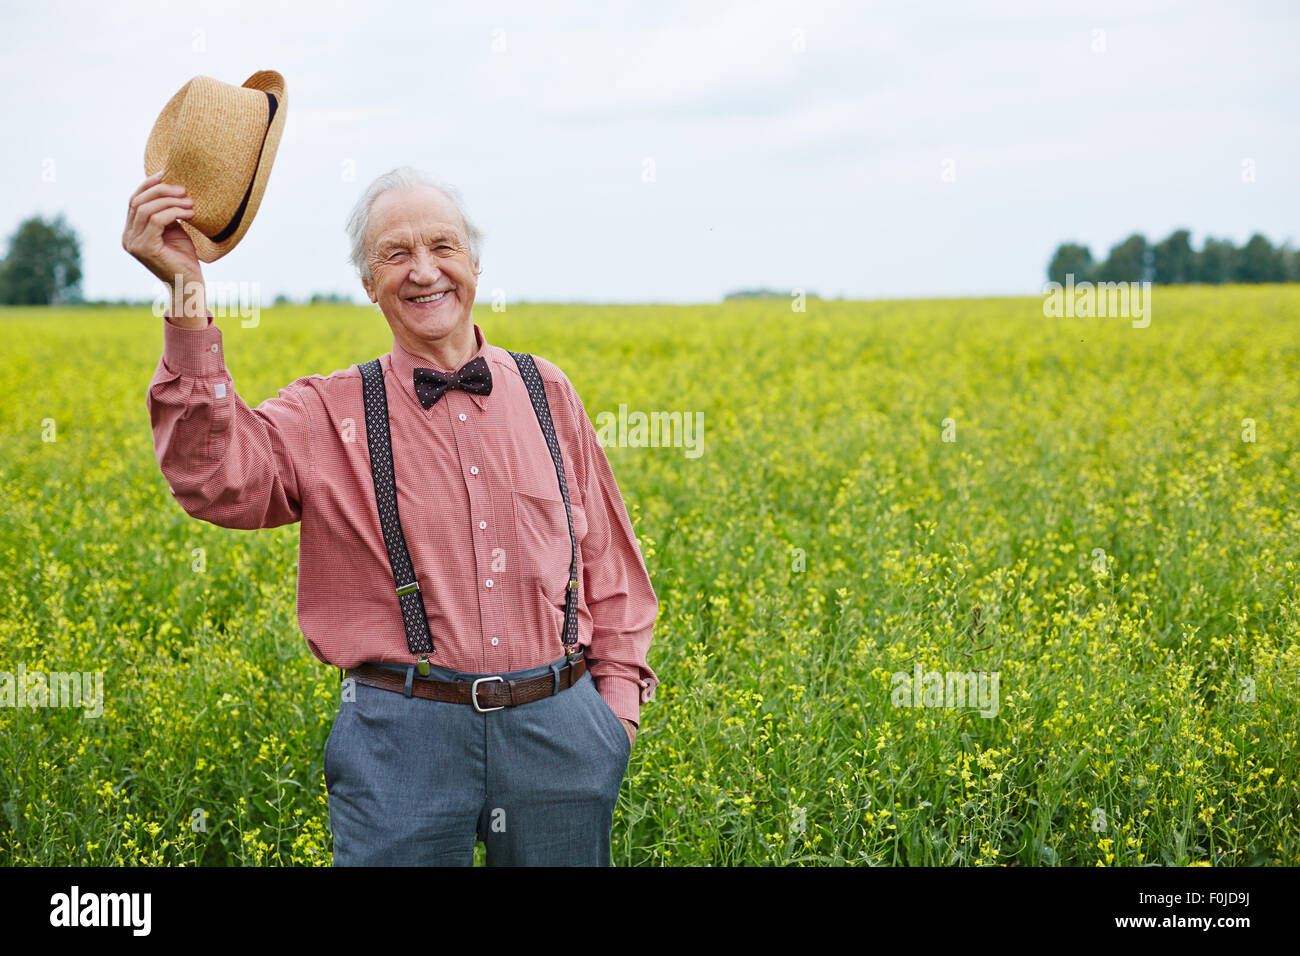 Cheerful senior man in smart casual looking at camera with his hat in hand Stock Photo